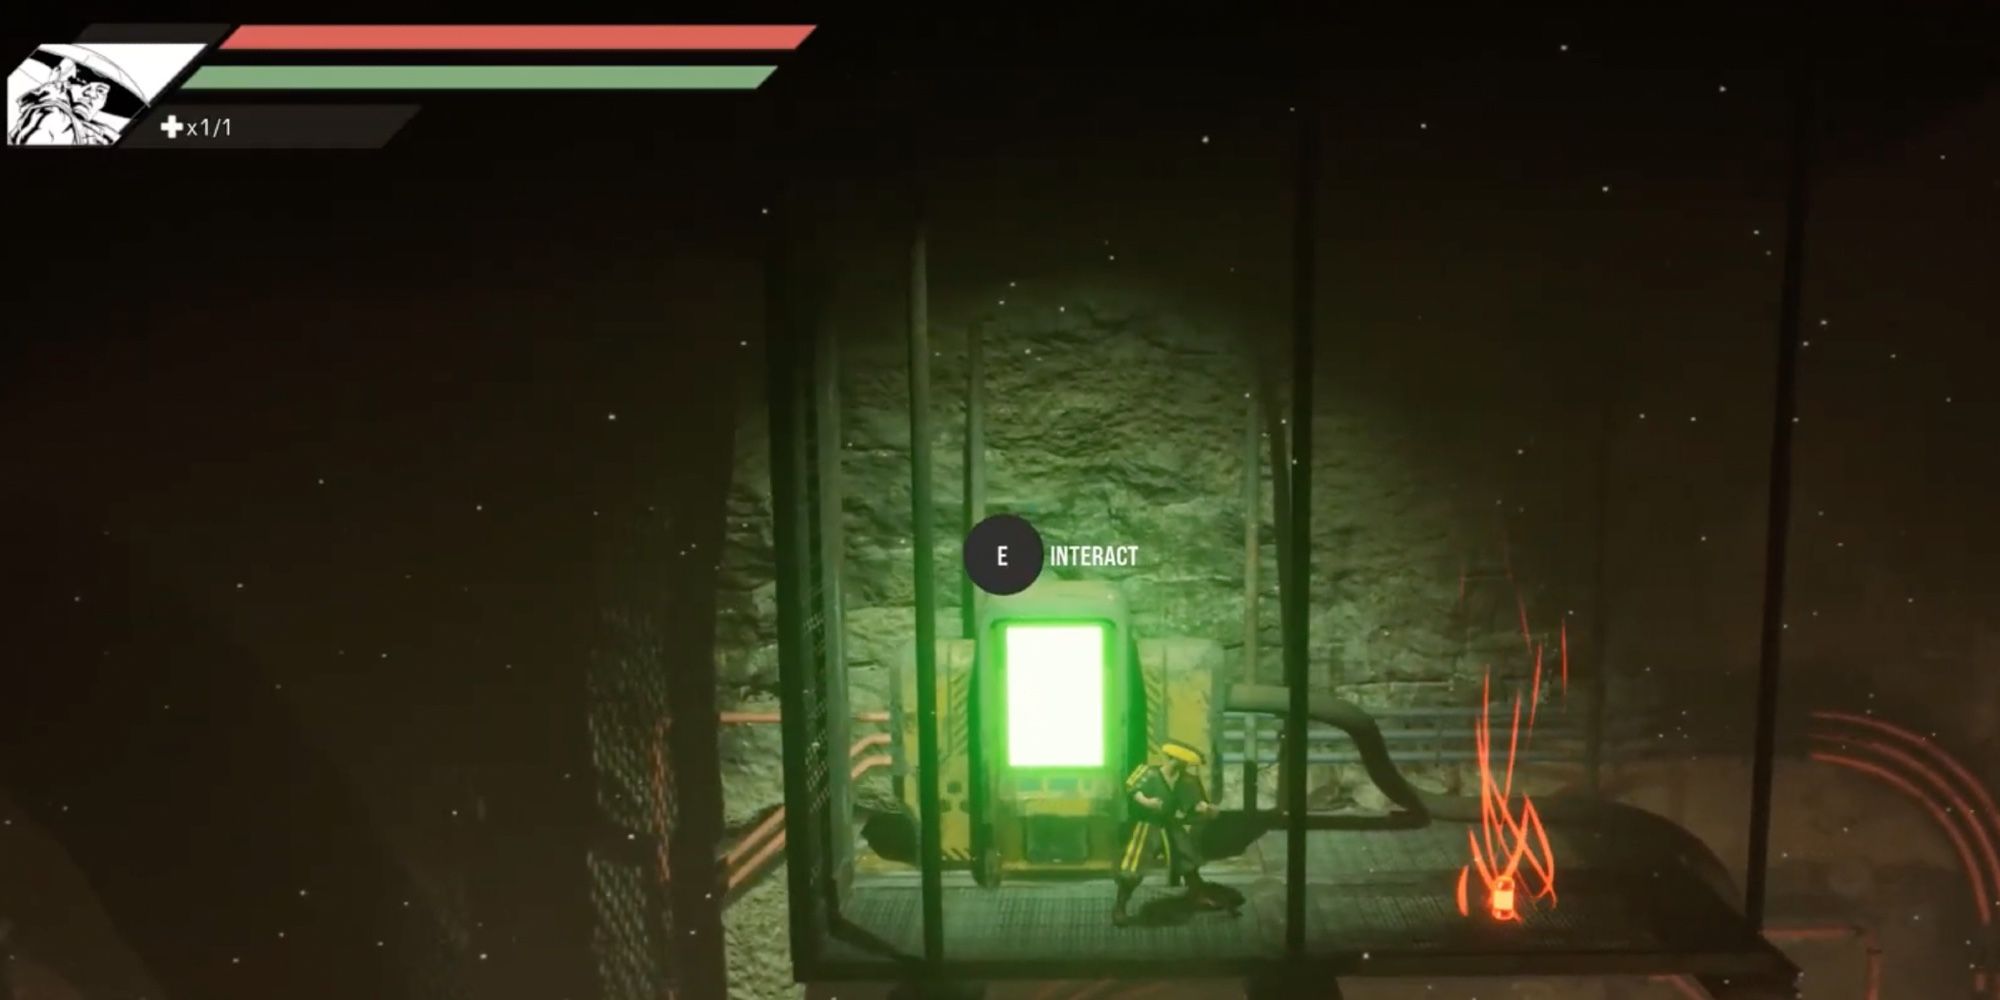 The player jumps onto a pedestal to open the gates to a hidden location on the map